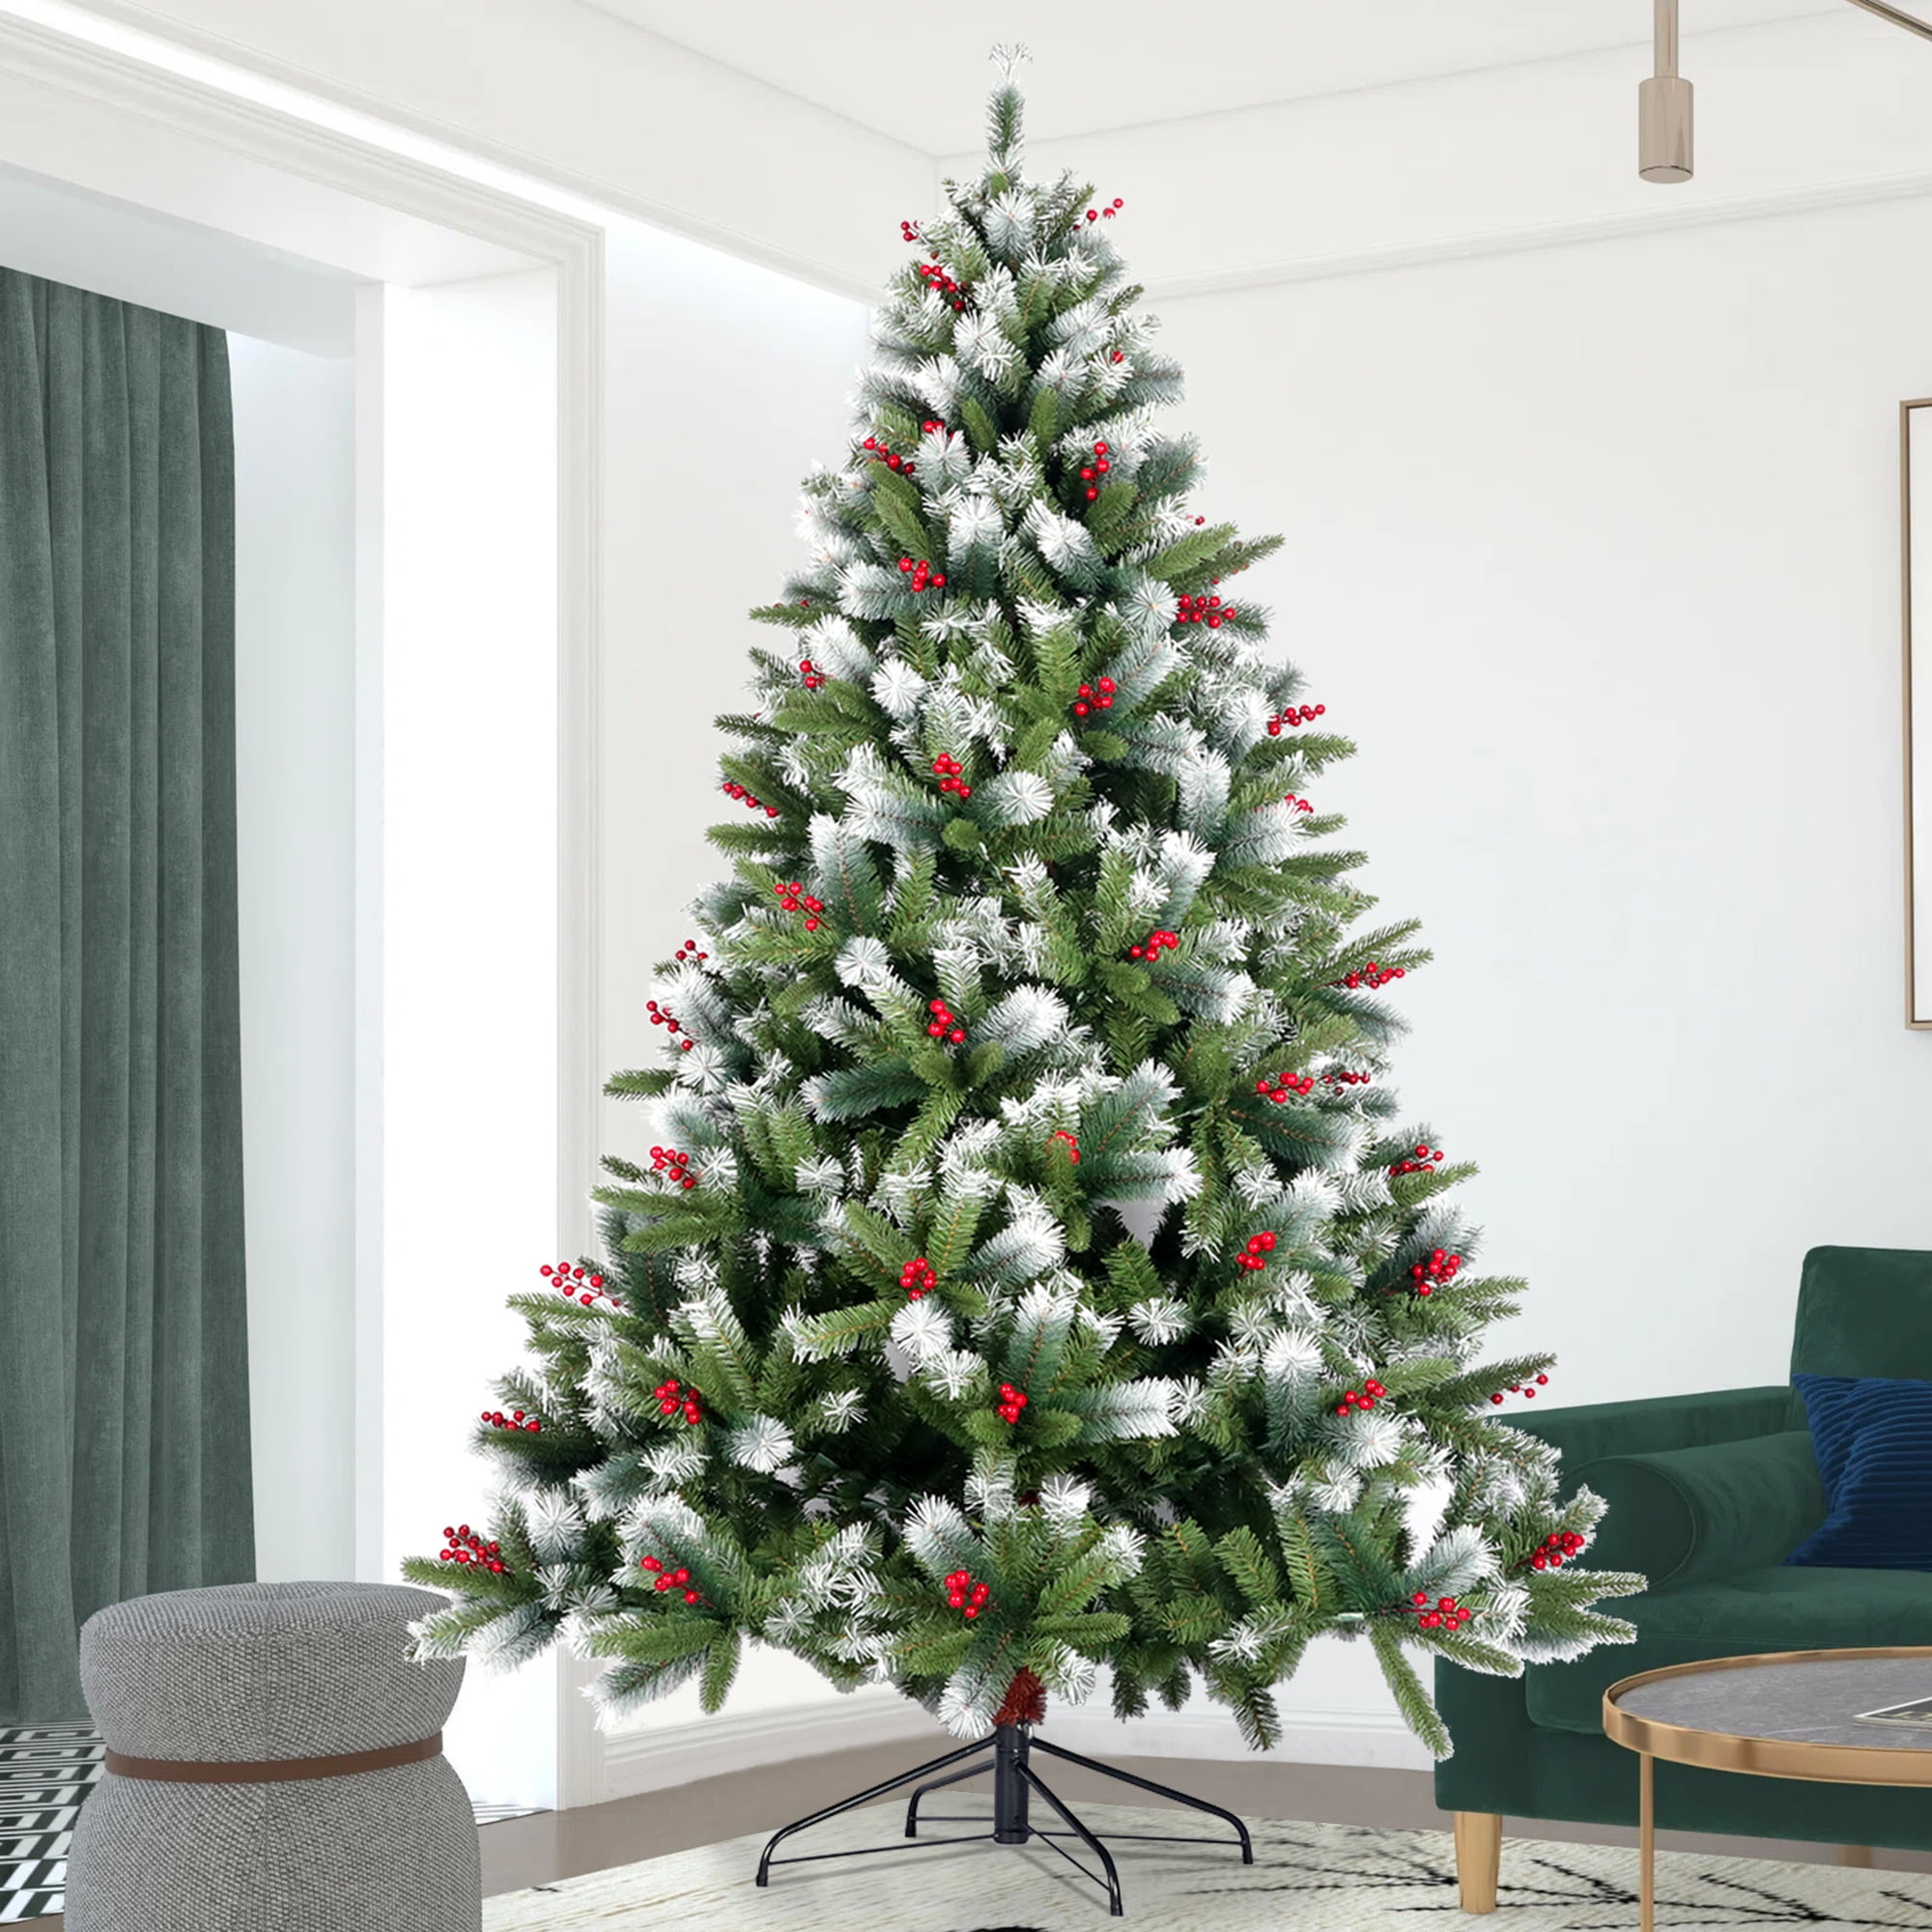 Btmway Christmas Trees, 7.5ft Artificial Christmas Tree with Lush 1145 Tips & Cones Red Berries, Christmas Decor Hinged Full Natural Spruce PVC Xmas